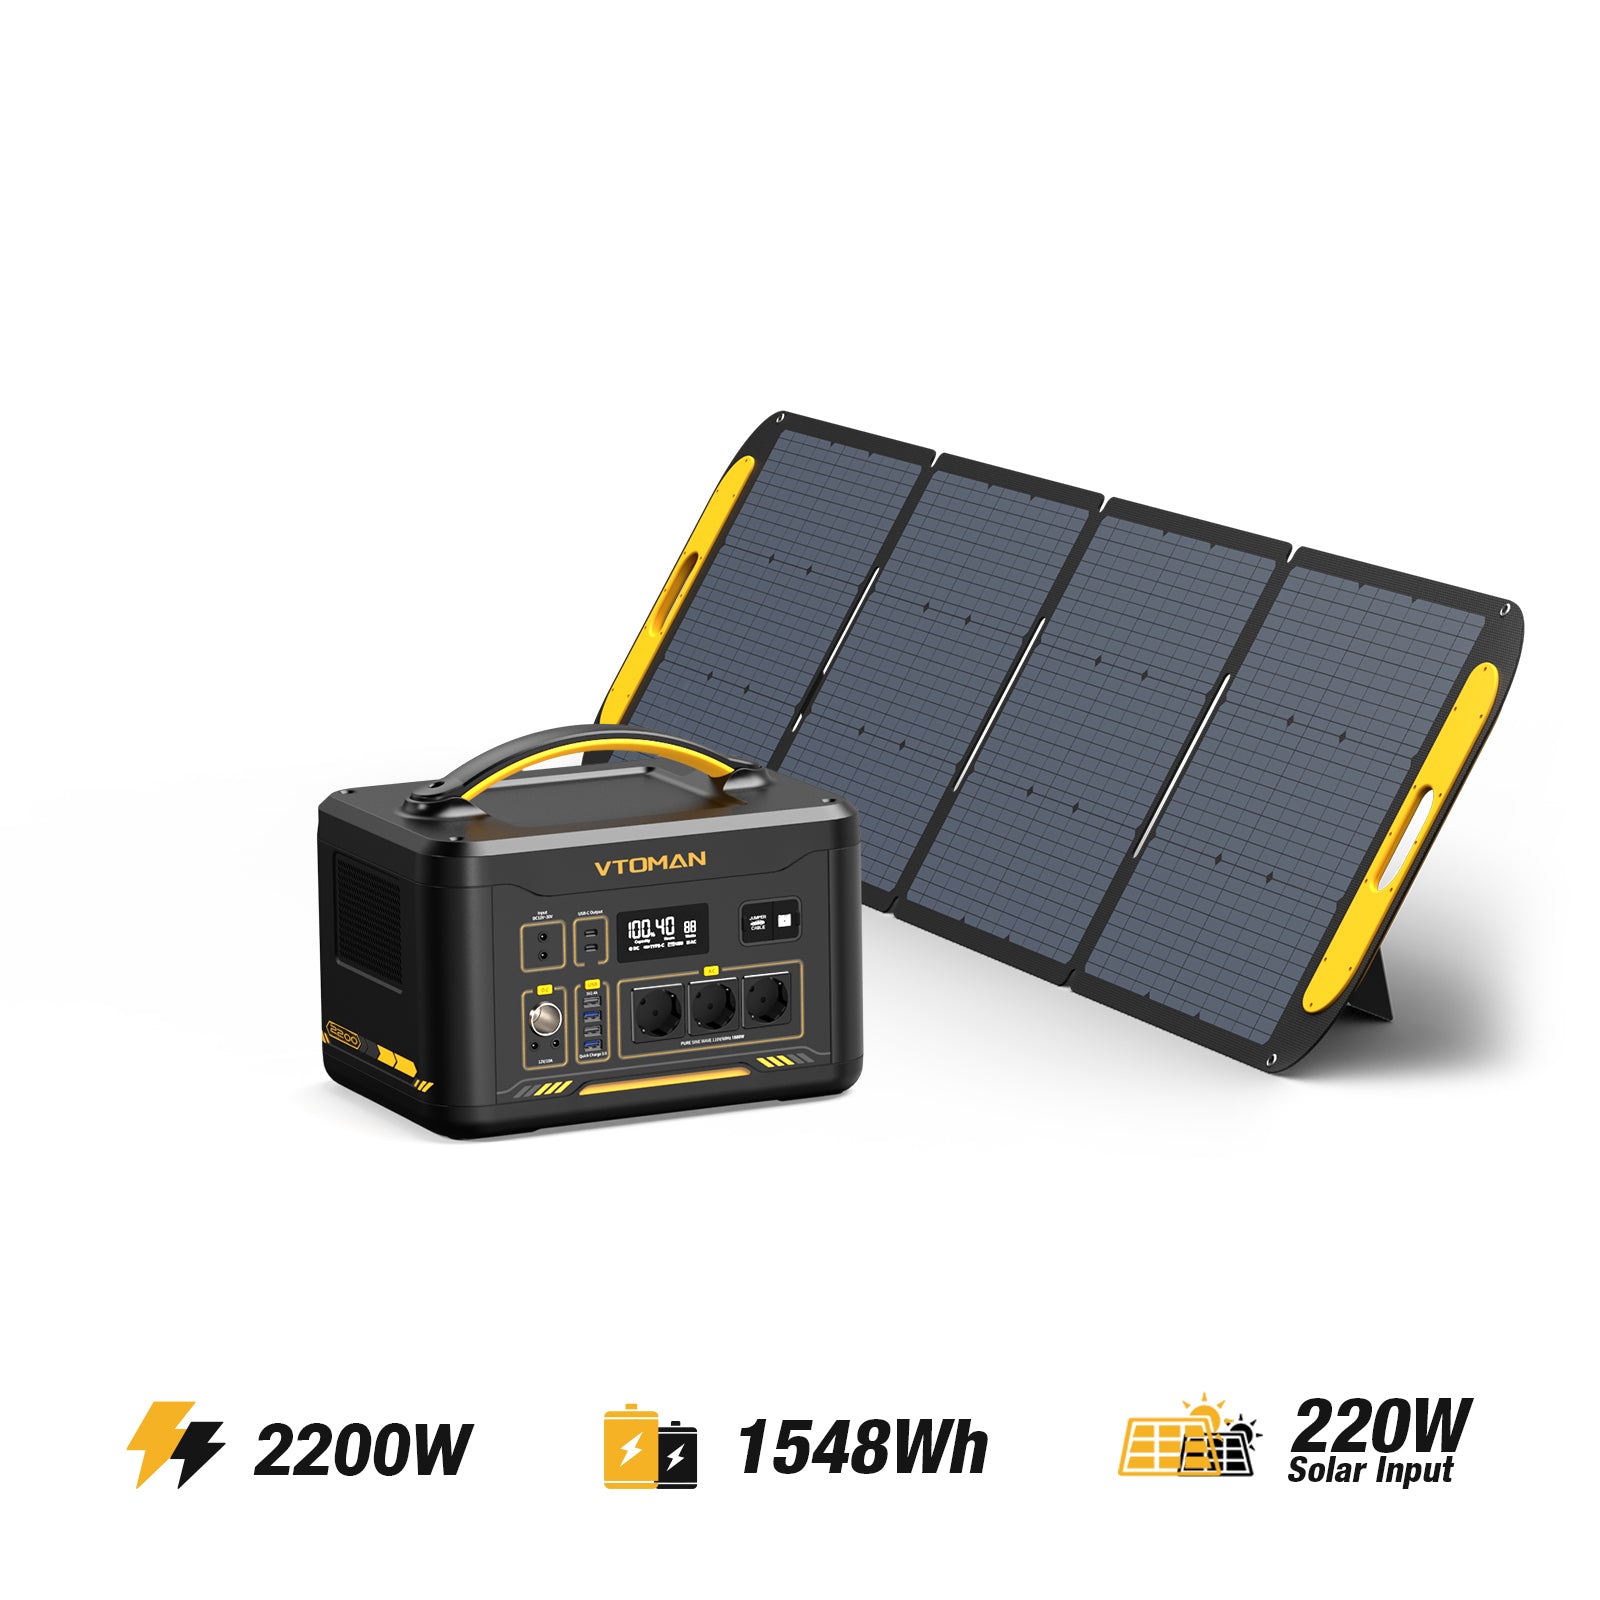 Jump 2200W/1548Wh  220W Solargenerator